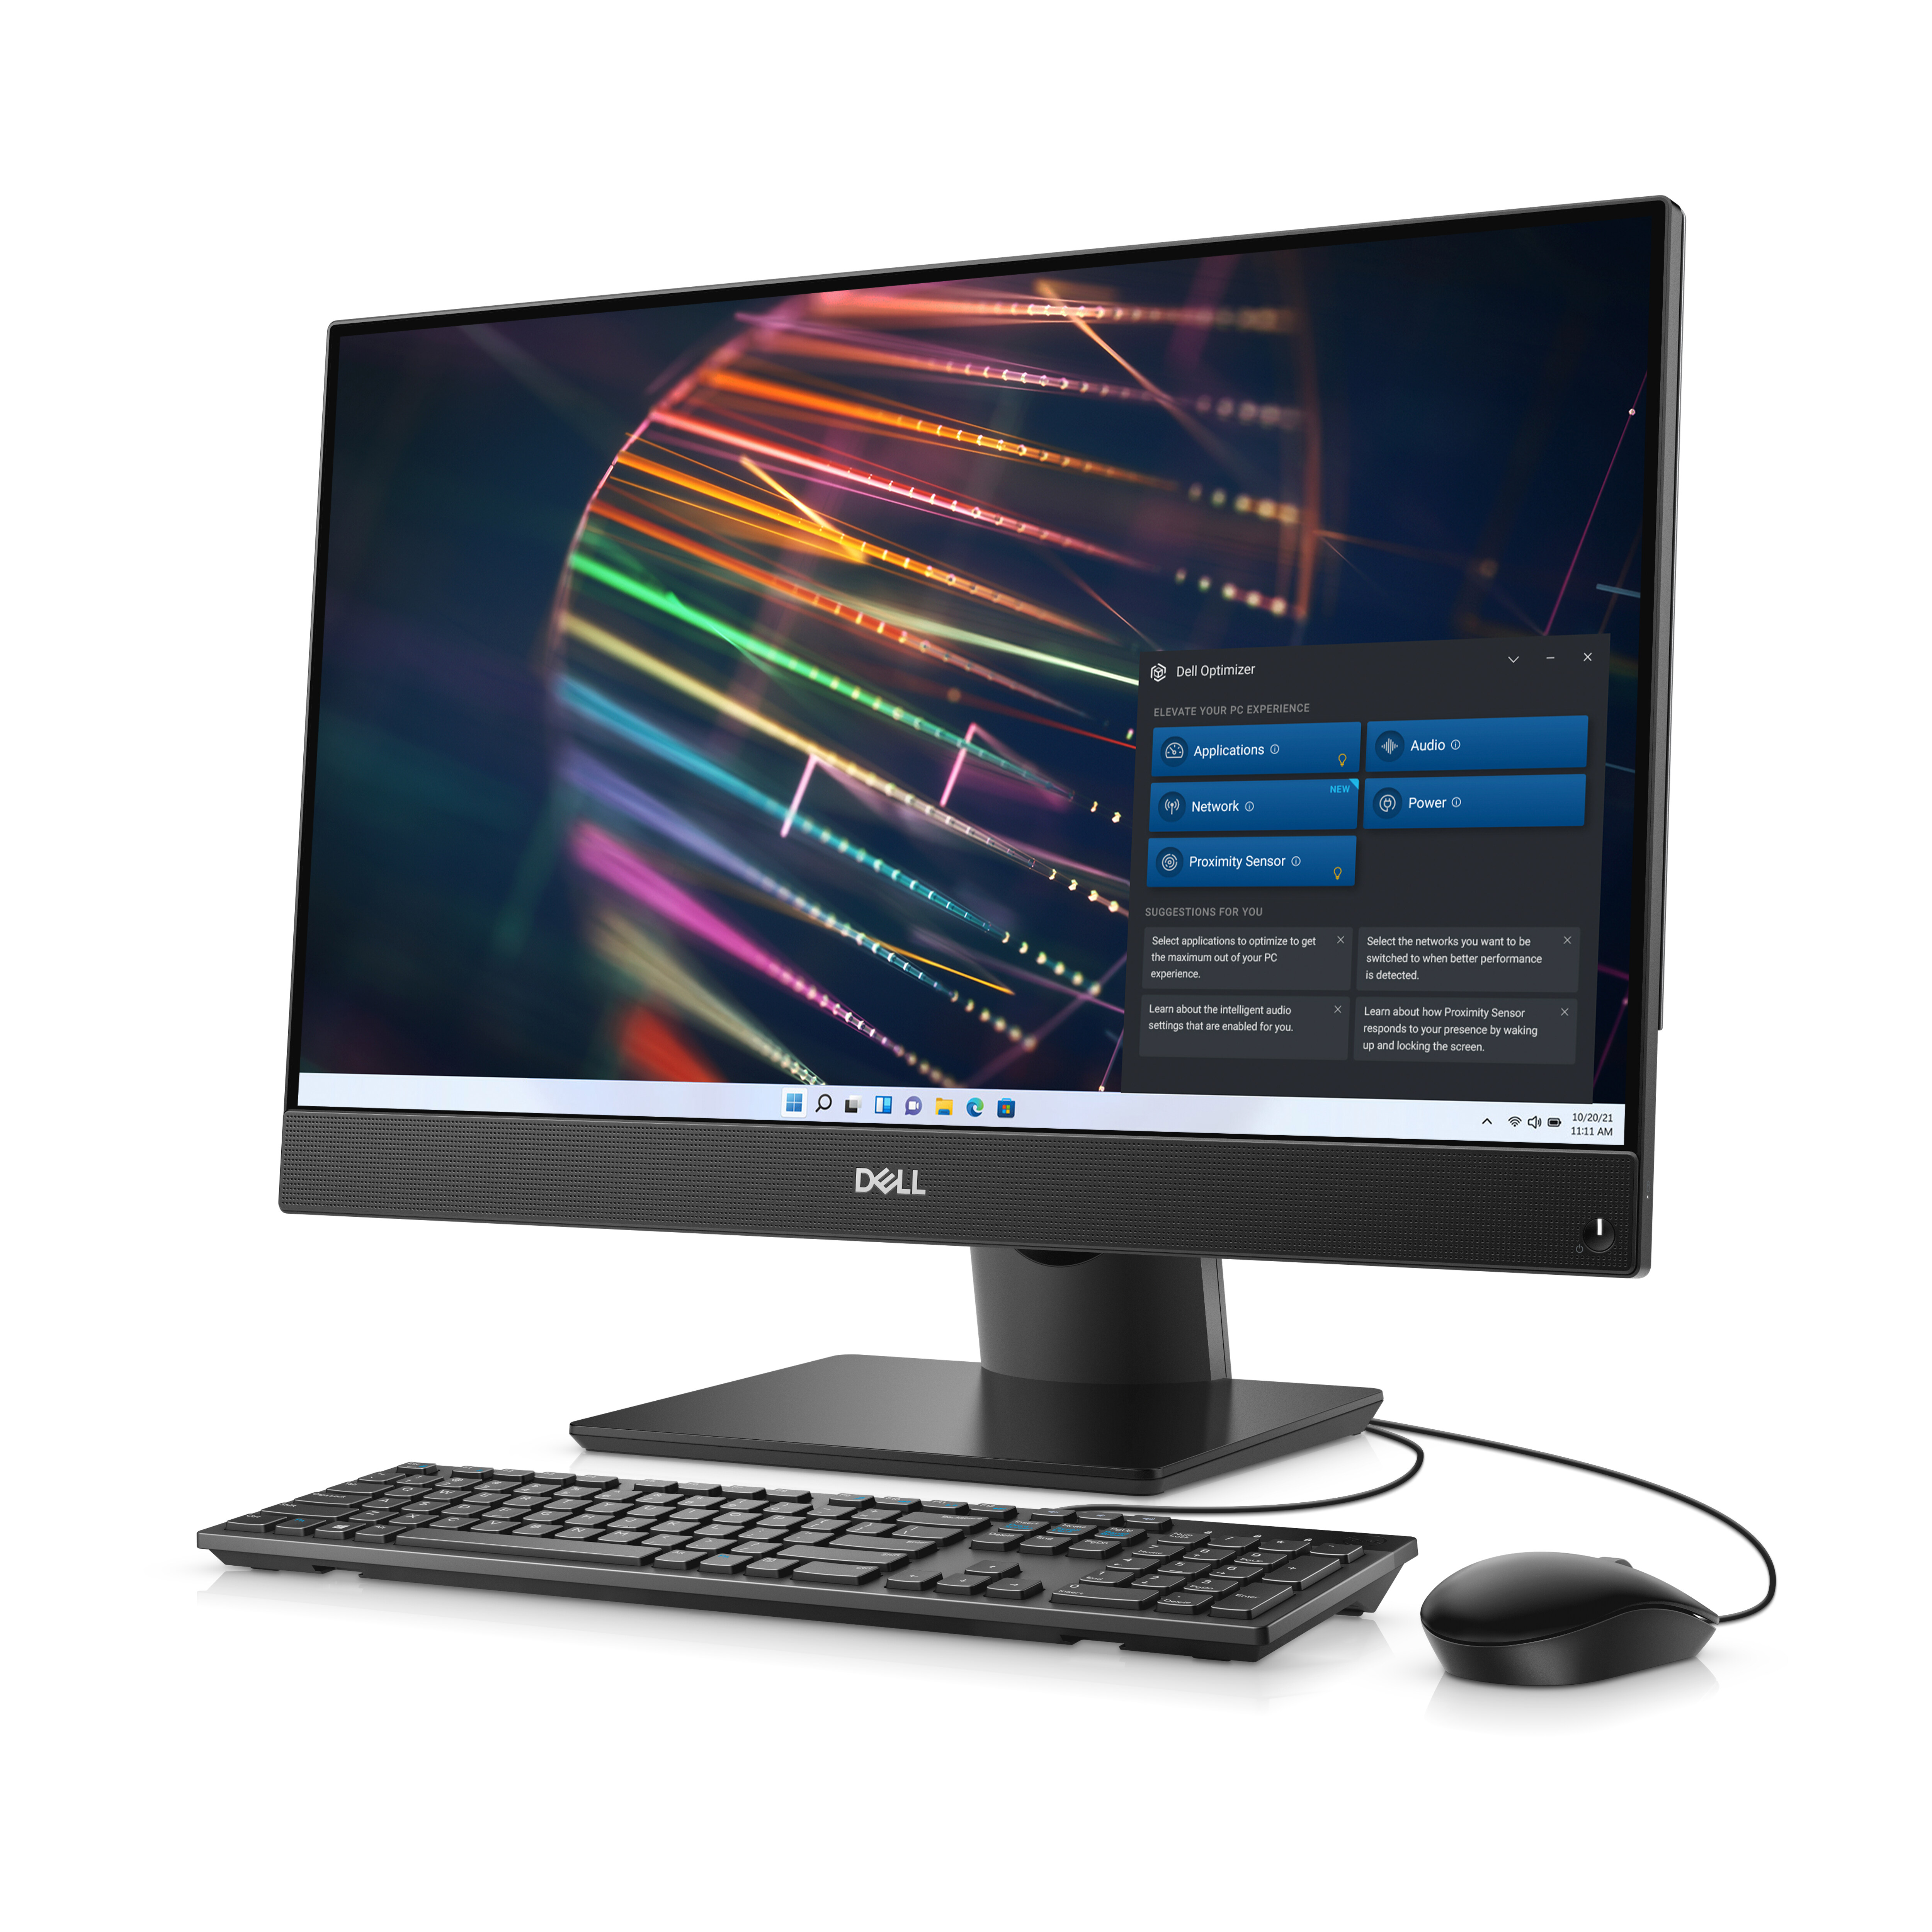 Dell All-in-One Personal Computer with Intel CPU, 32GB RAM, and Windows 10